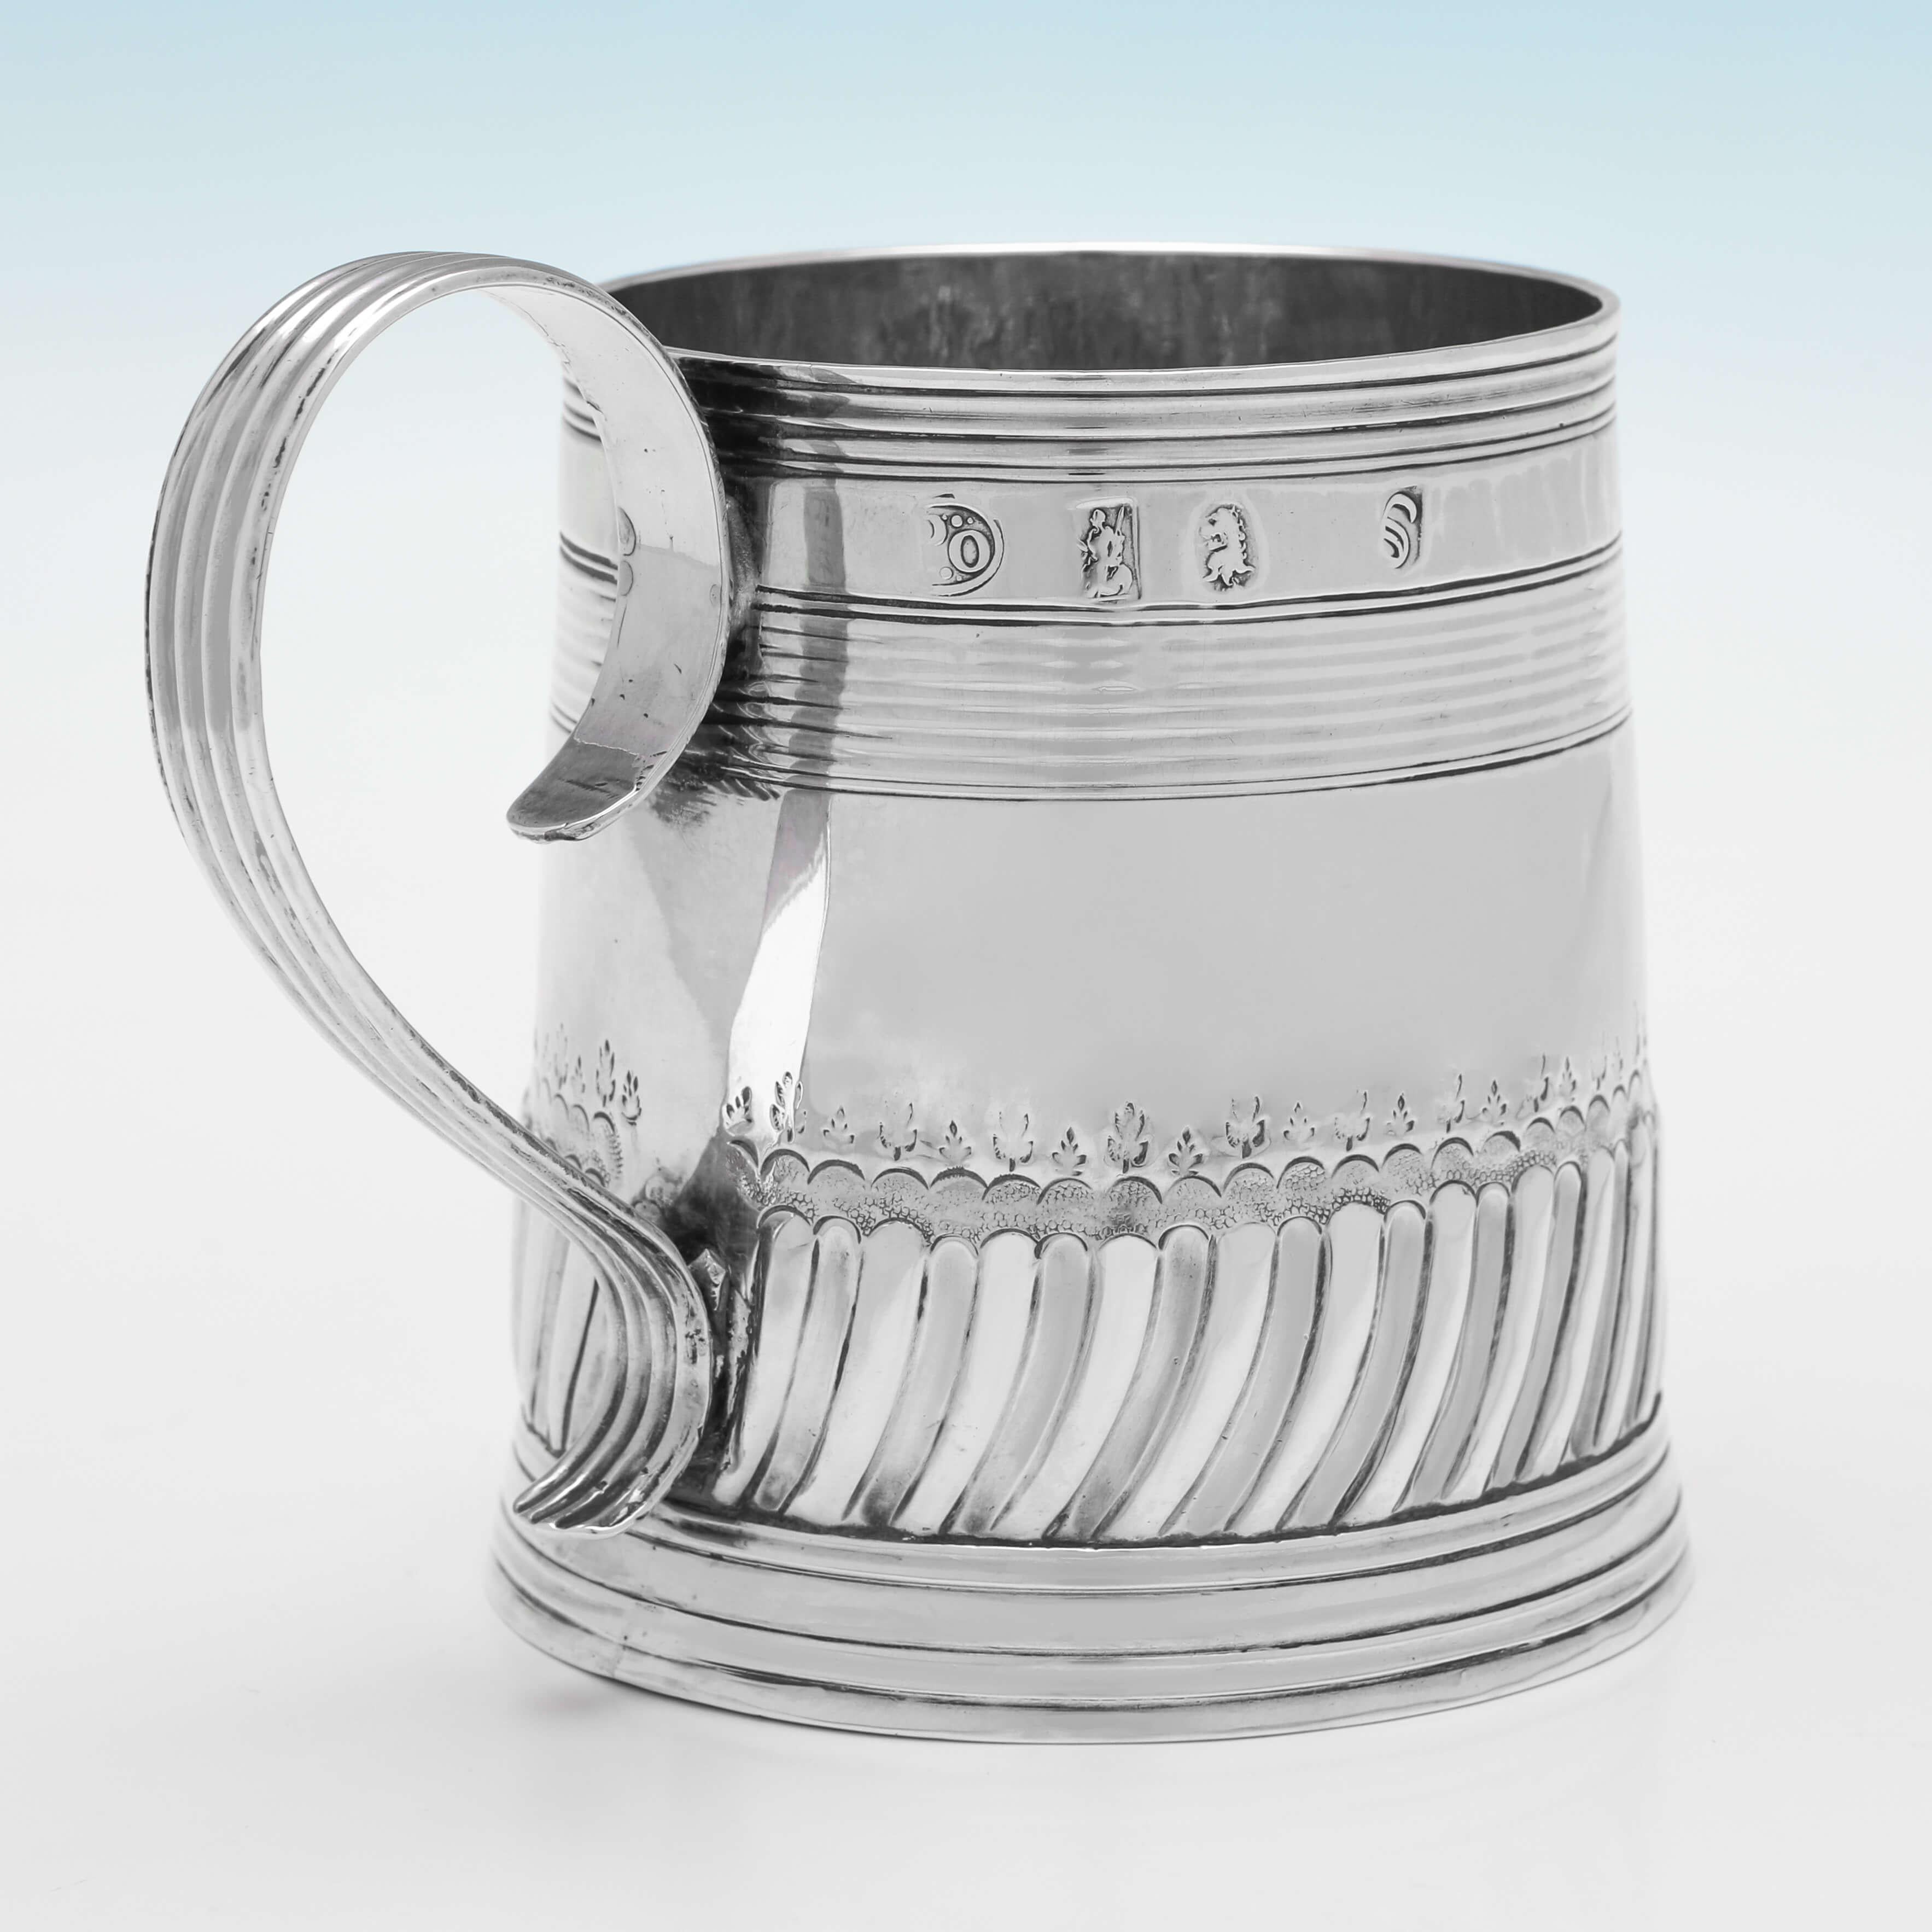 Hallmarked in London in 1699 by John Porter, this wonderful, William III Period, Antique, Britannia Standard Silver Mug, is straight sided, and features swirled fluting and bands of reed decoration to the body and a reed handle. 

The mug measures